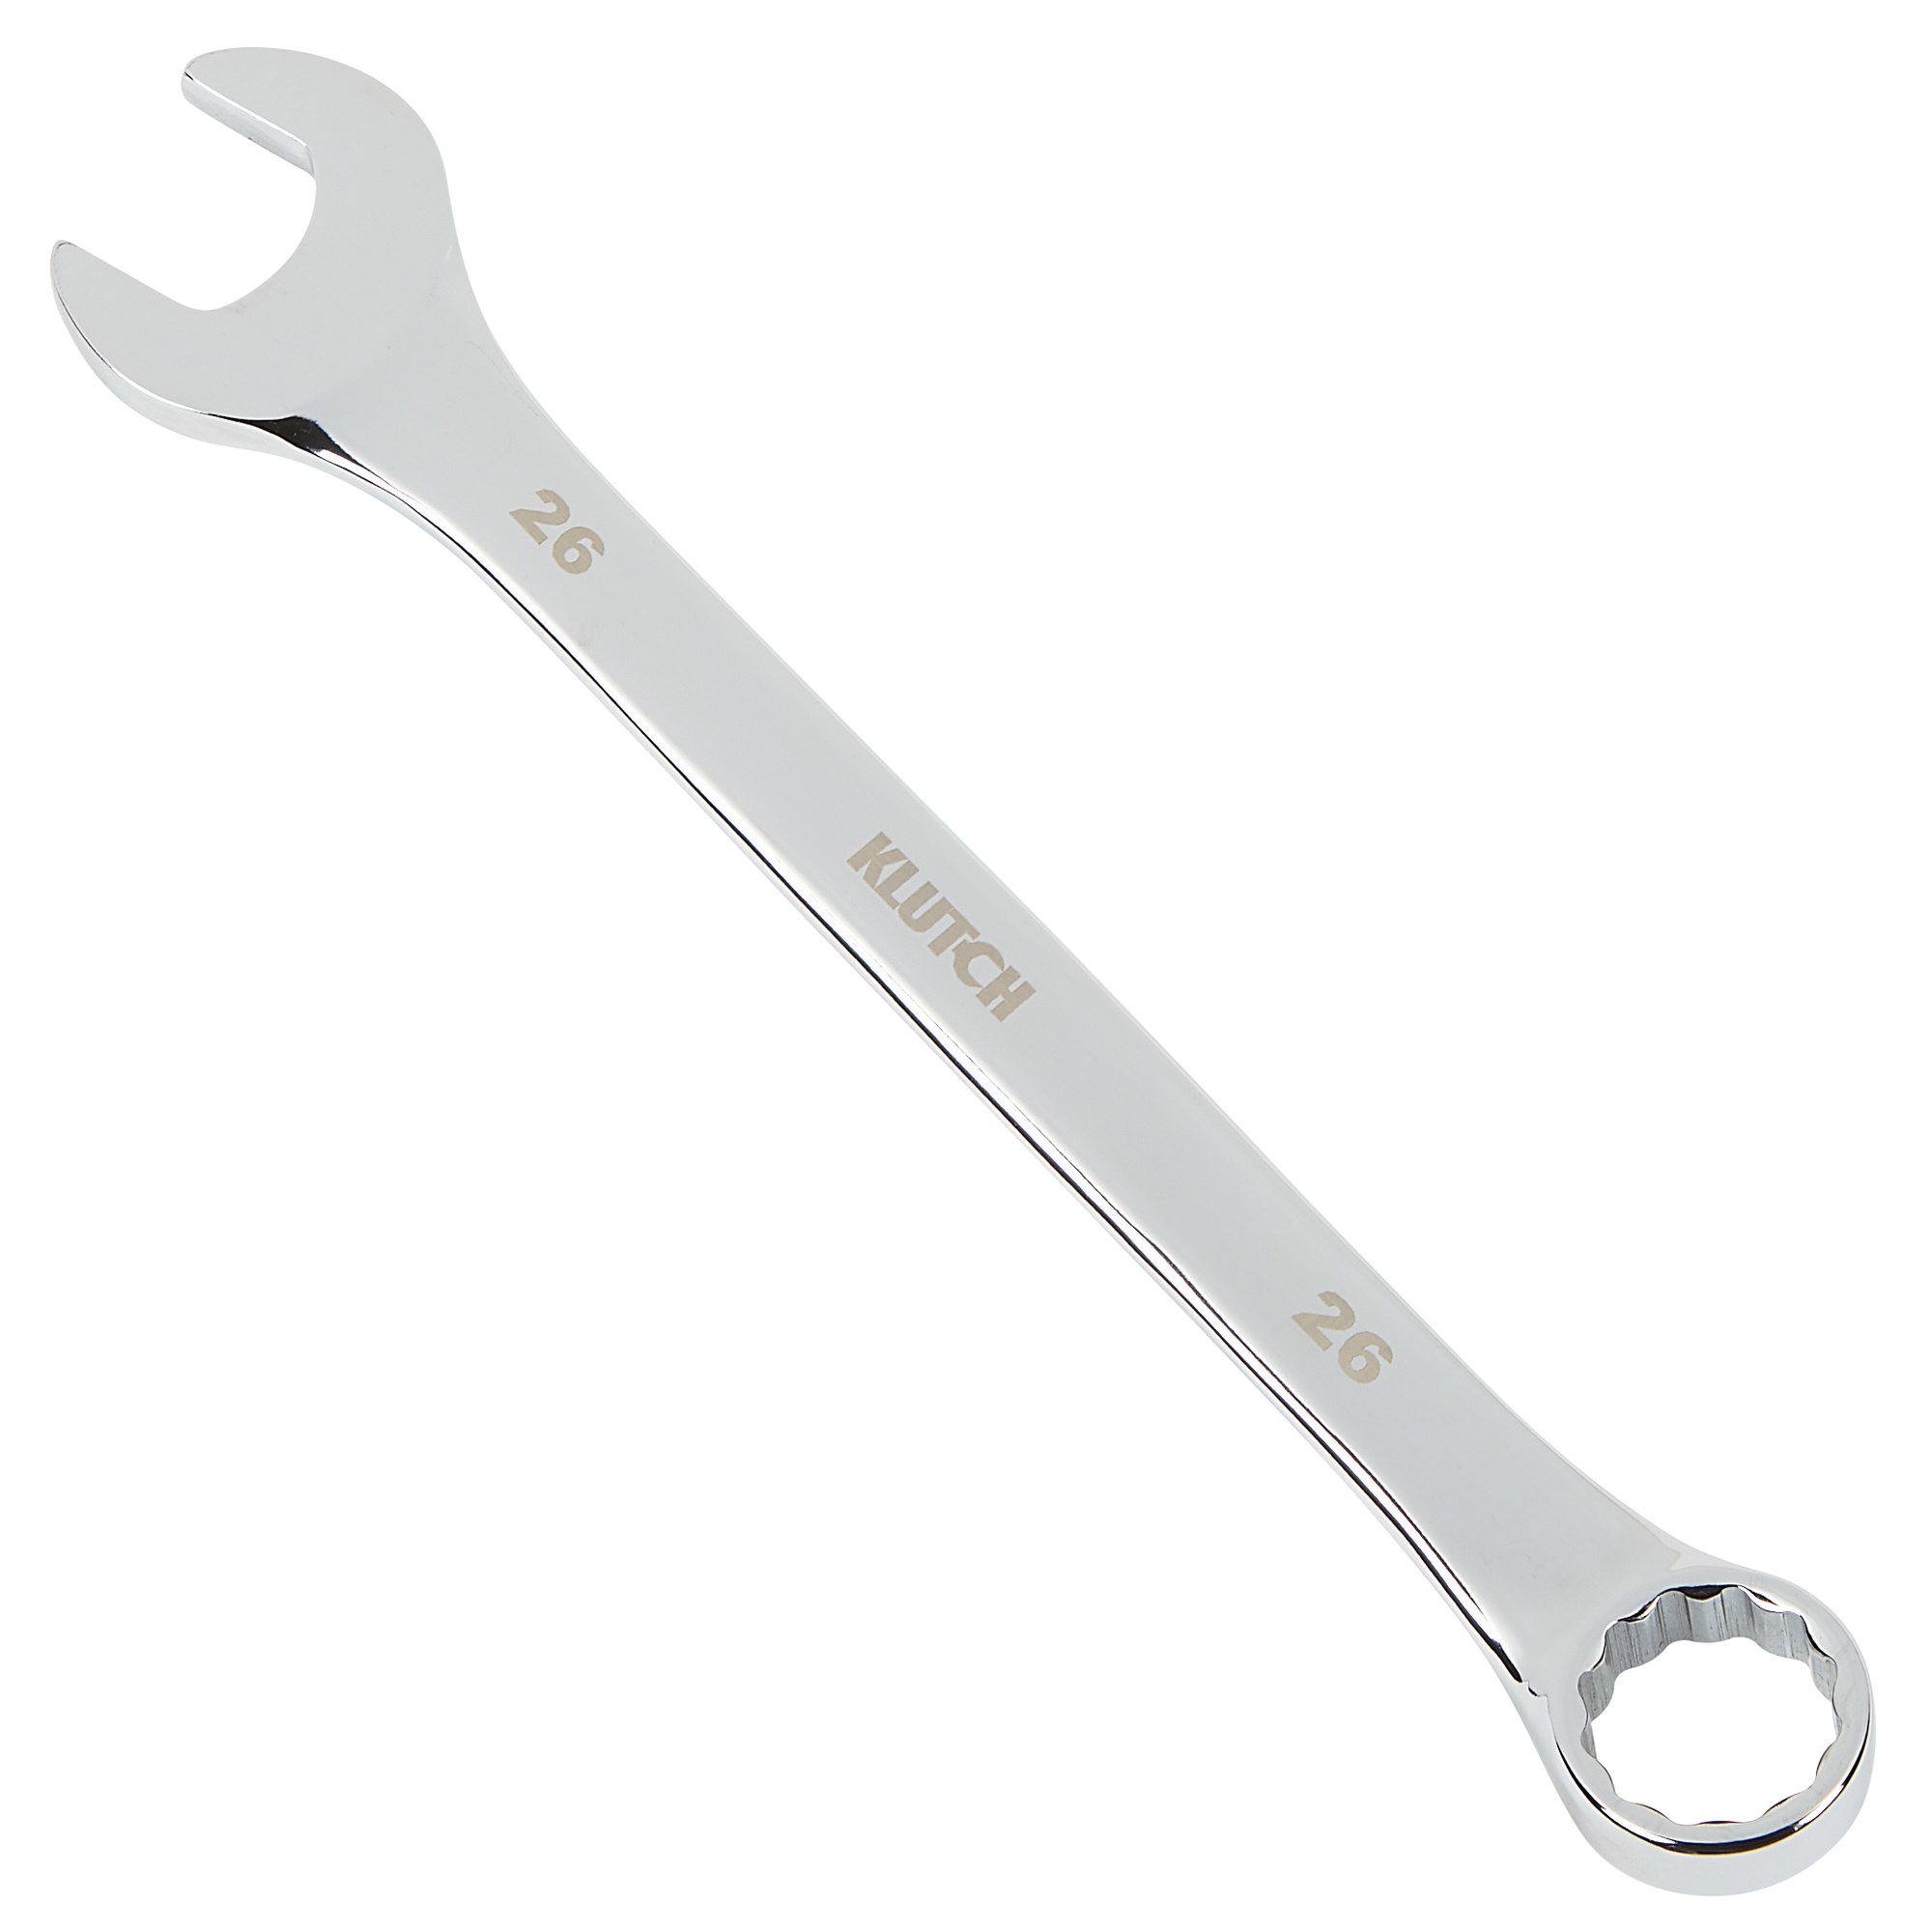 Klutch Metric Combination Wrench, 26MM x 11.42Inch, Model E-2004